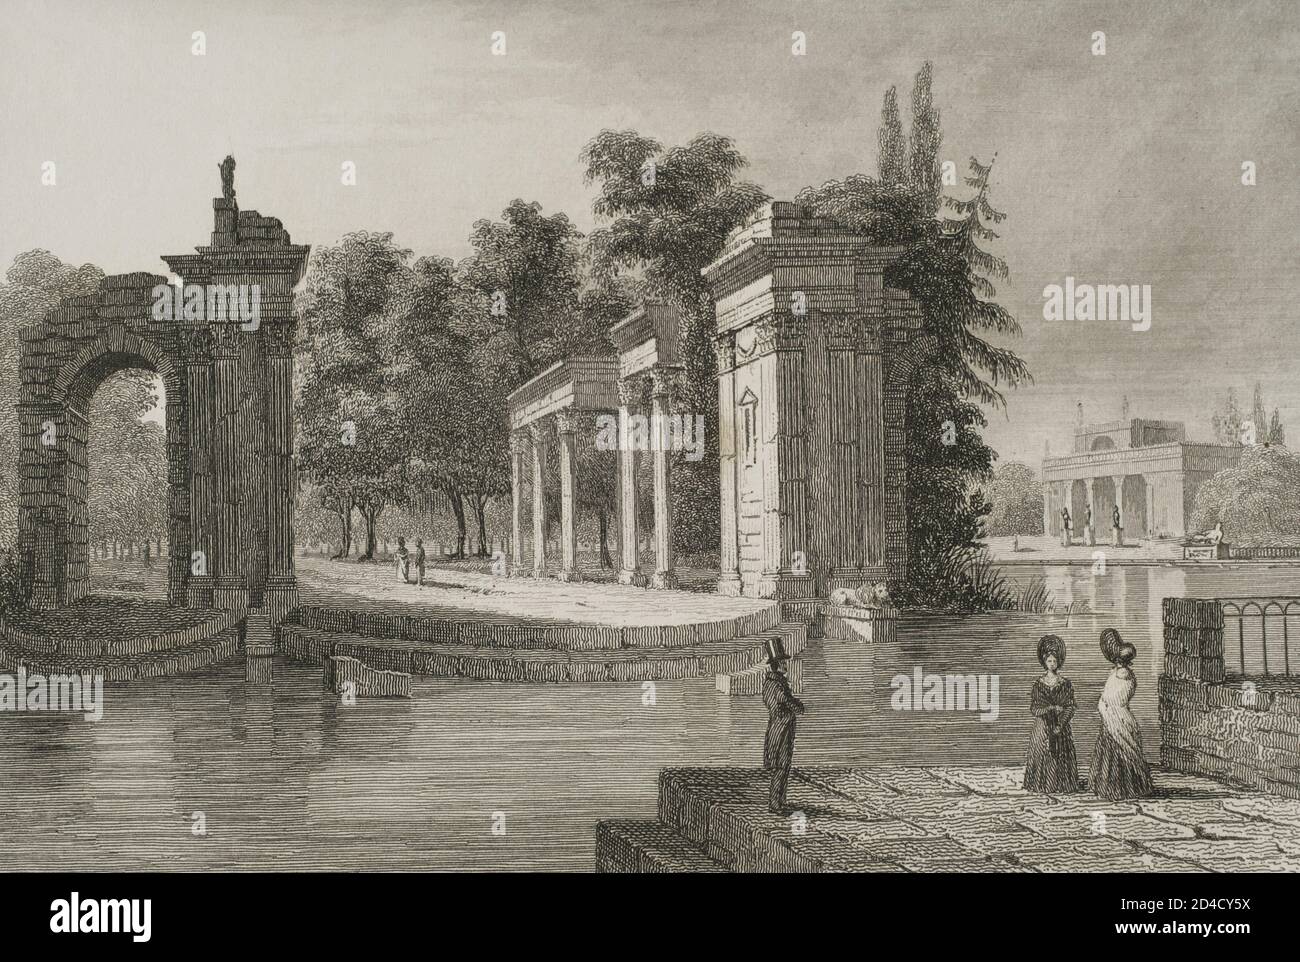 Poland, Warsaw. Lazienki Park. The Royal Bath. Ancient Roman-style amphitheatre, building that was erected after the redesign of the estate by Stanislaw August Poniatowski, in the mid-18th century. Engraving by Lemaitre and Cholet. History of Poland, by Charles Foster. Panorama Universal, 1840. Stock Photo